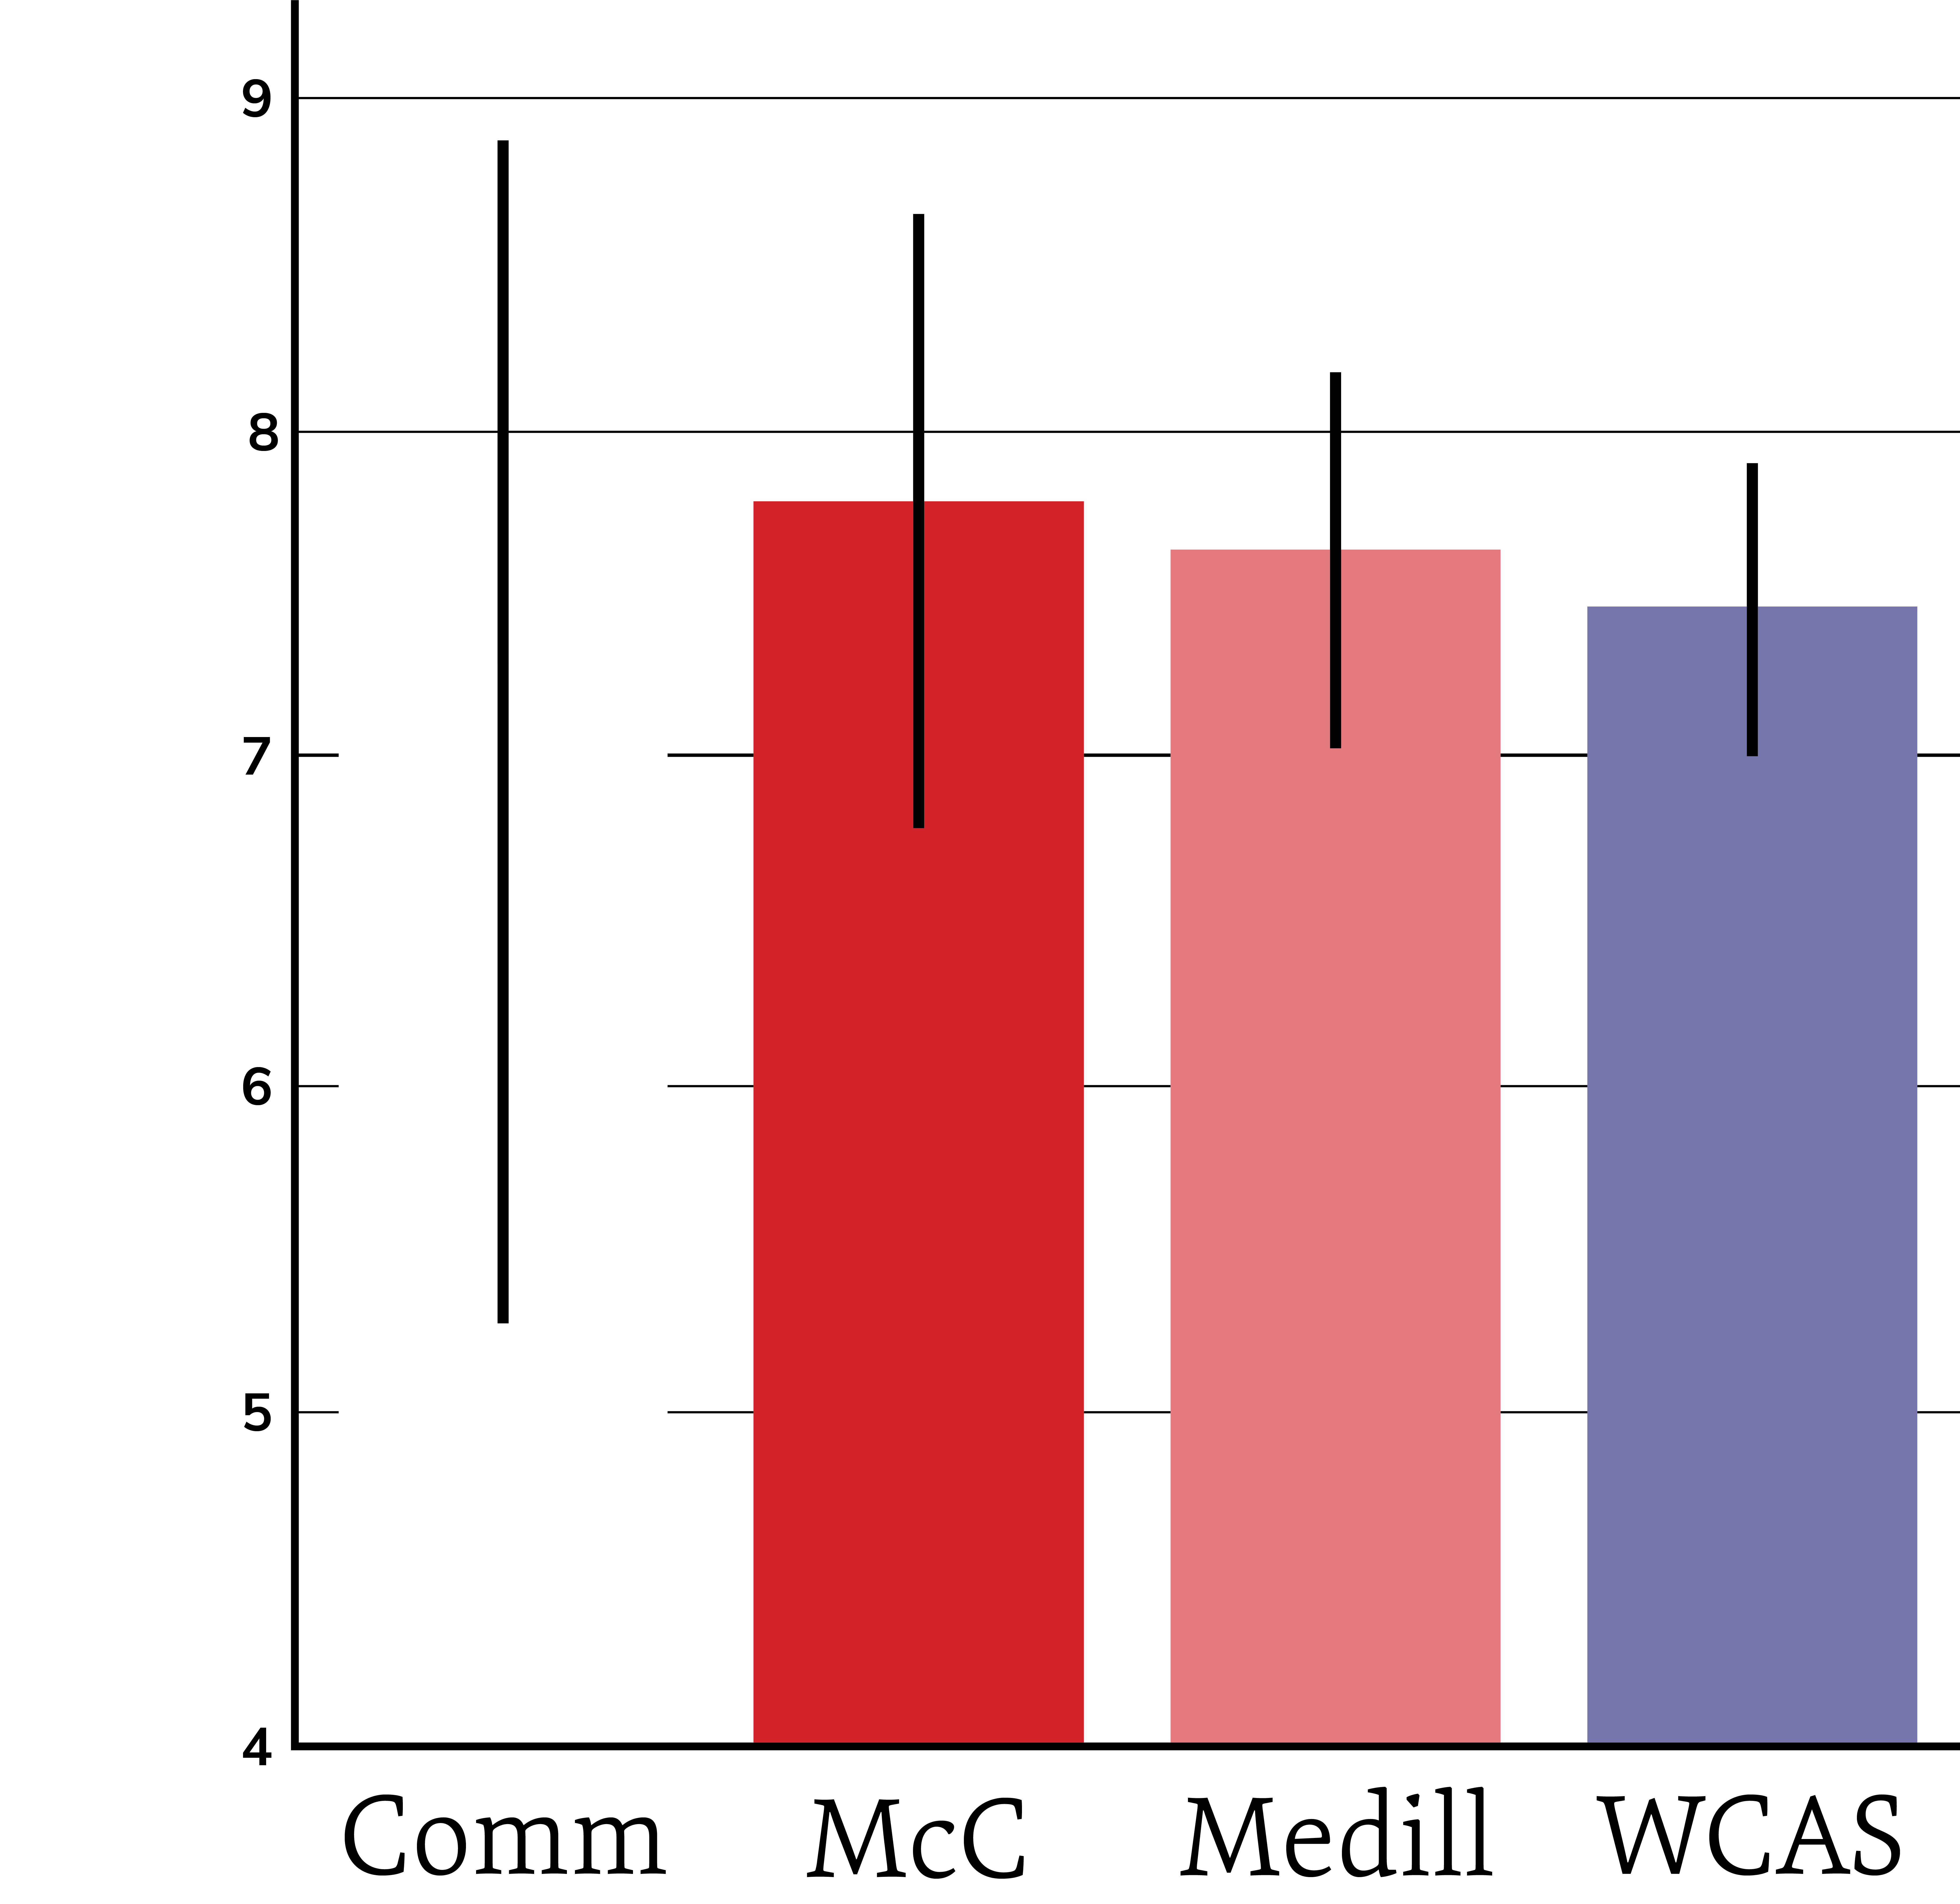 Bar graph shows the comfort level around talking about sex for students in different schools. Vertical black lines show the 95% confidence interval. The average for Communications is a little over 7, close to 8 for McCormick, and around 7.5 for Medill and Weinberg.